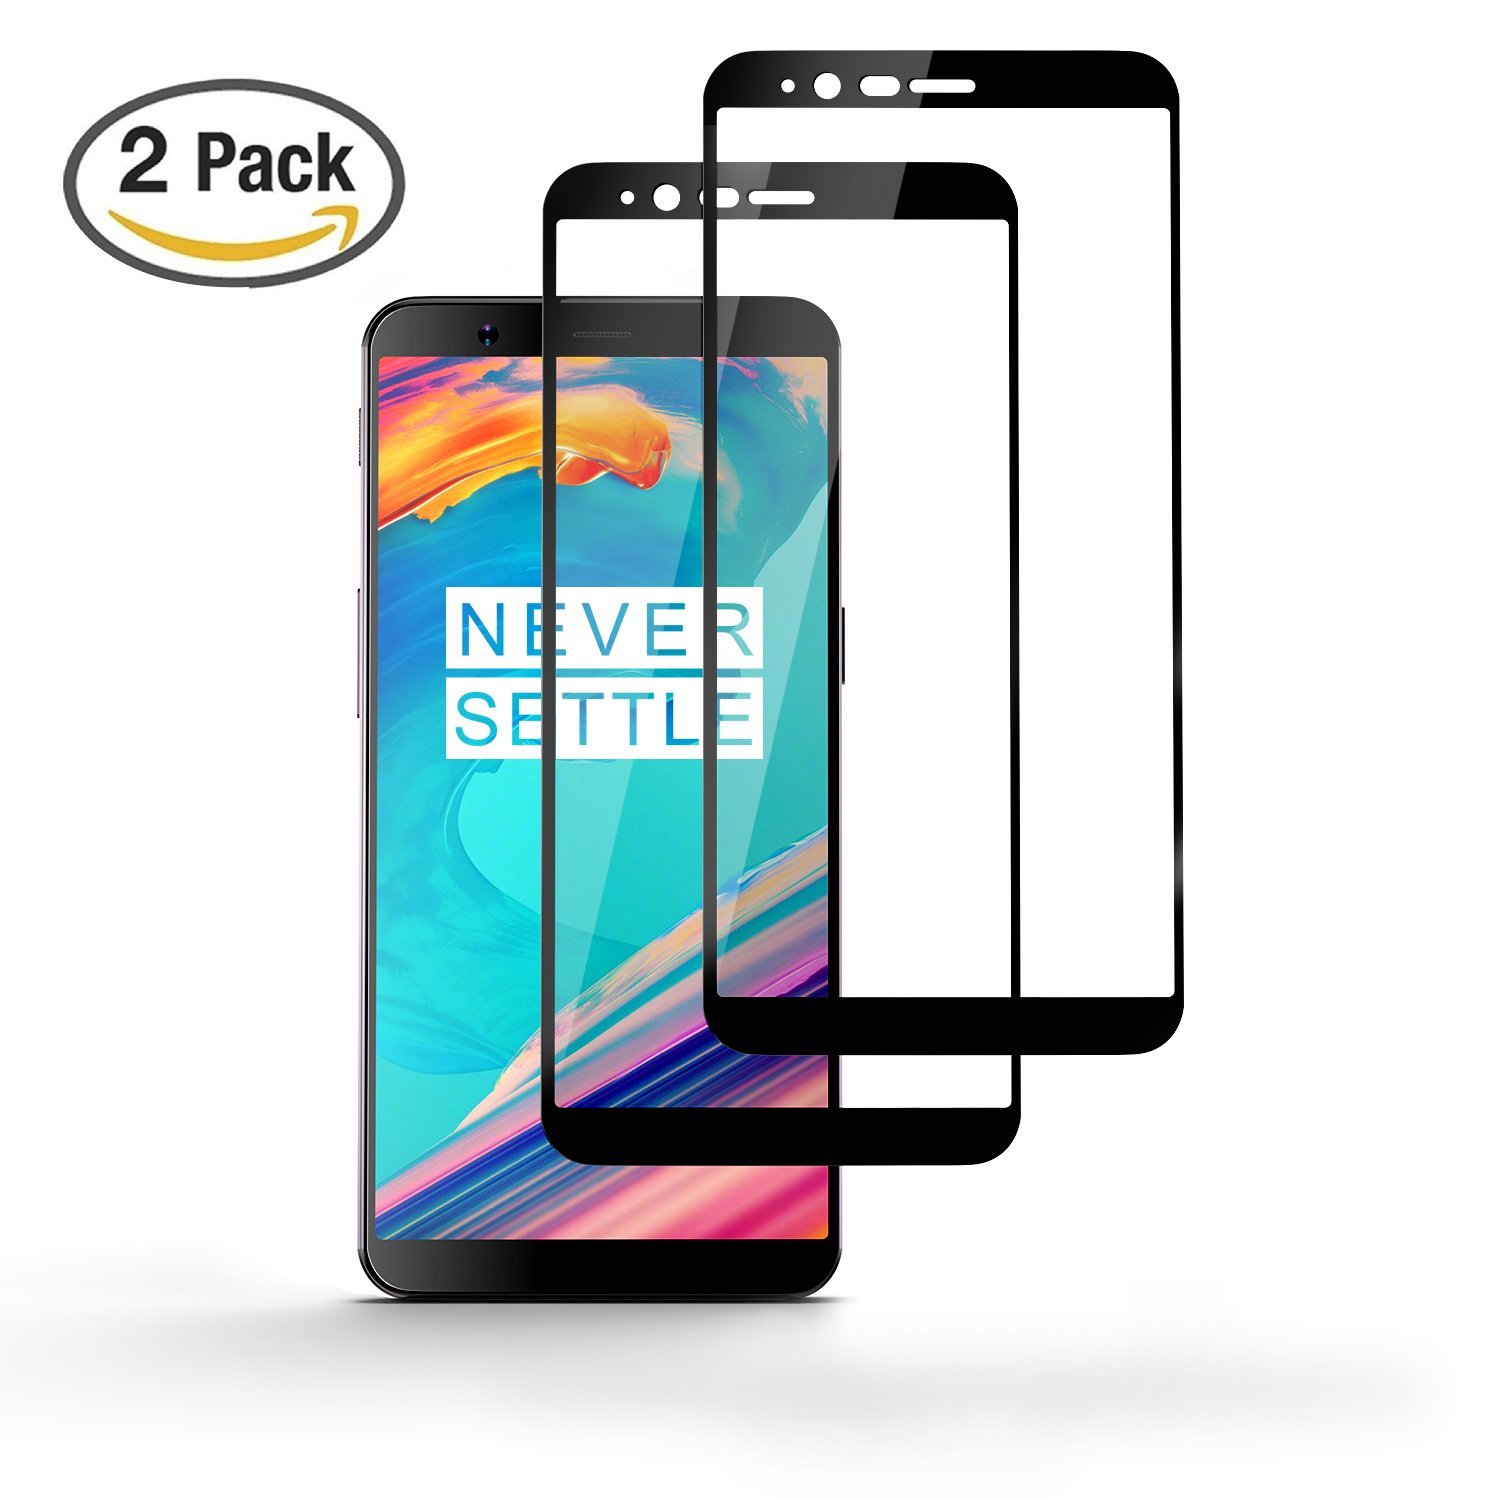 OnePlus 5T screen protectors - Auckly